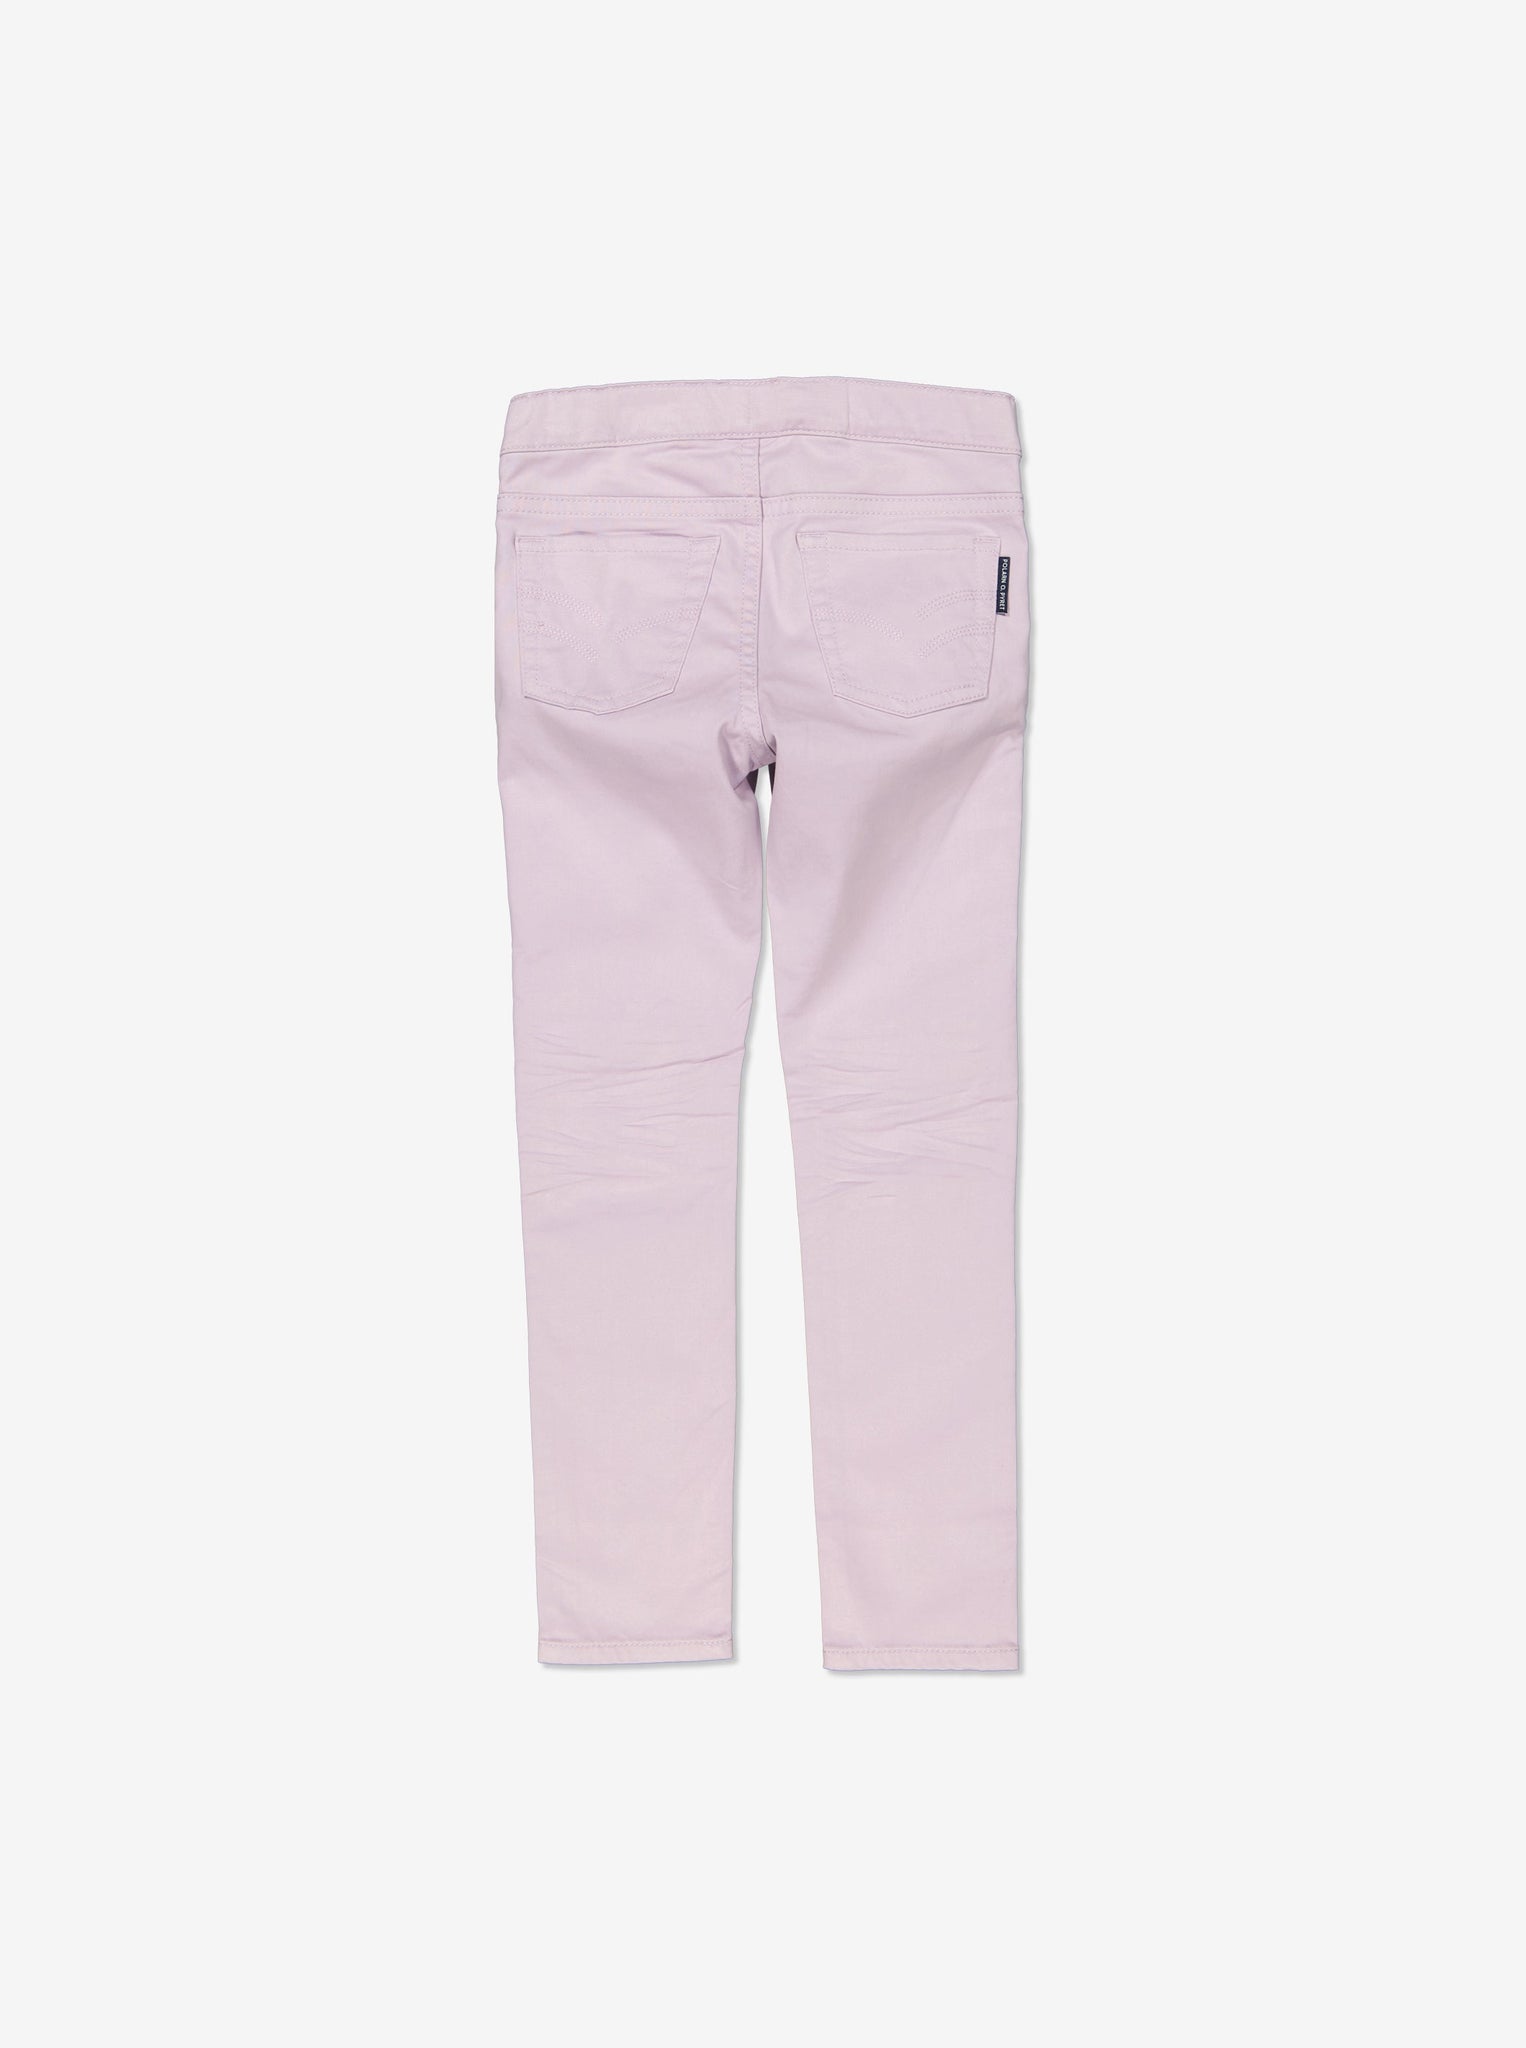  Pink Kids Chino Trousers from Polarn O. Pyret Kidswear. Made using eco-friendly materials.